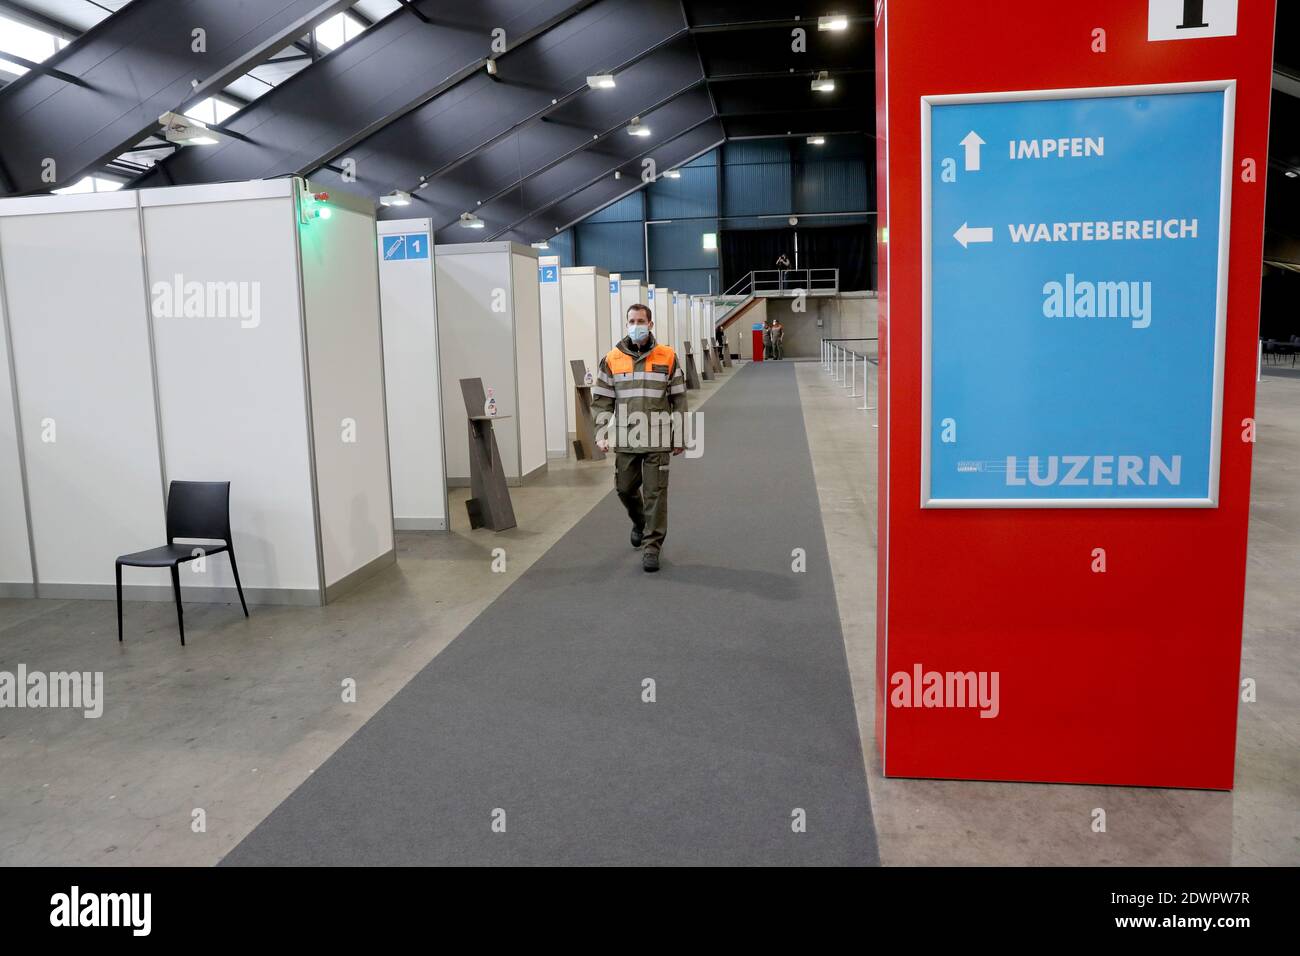 A member of the Swiss civil protection walks in front of vaccination cabins  at the Messe Luzern fairground, as the spread of the coronavirus disease  (COVID-19) continues, in Lucerne, Switzerland December 23,